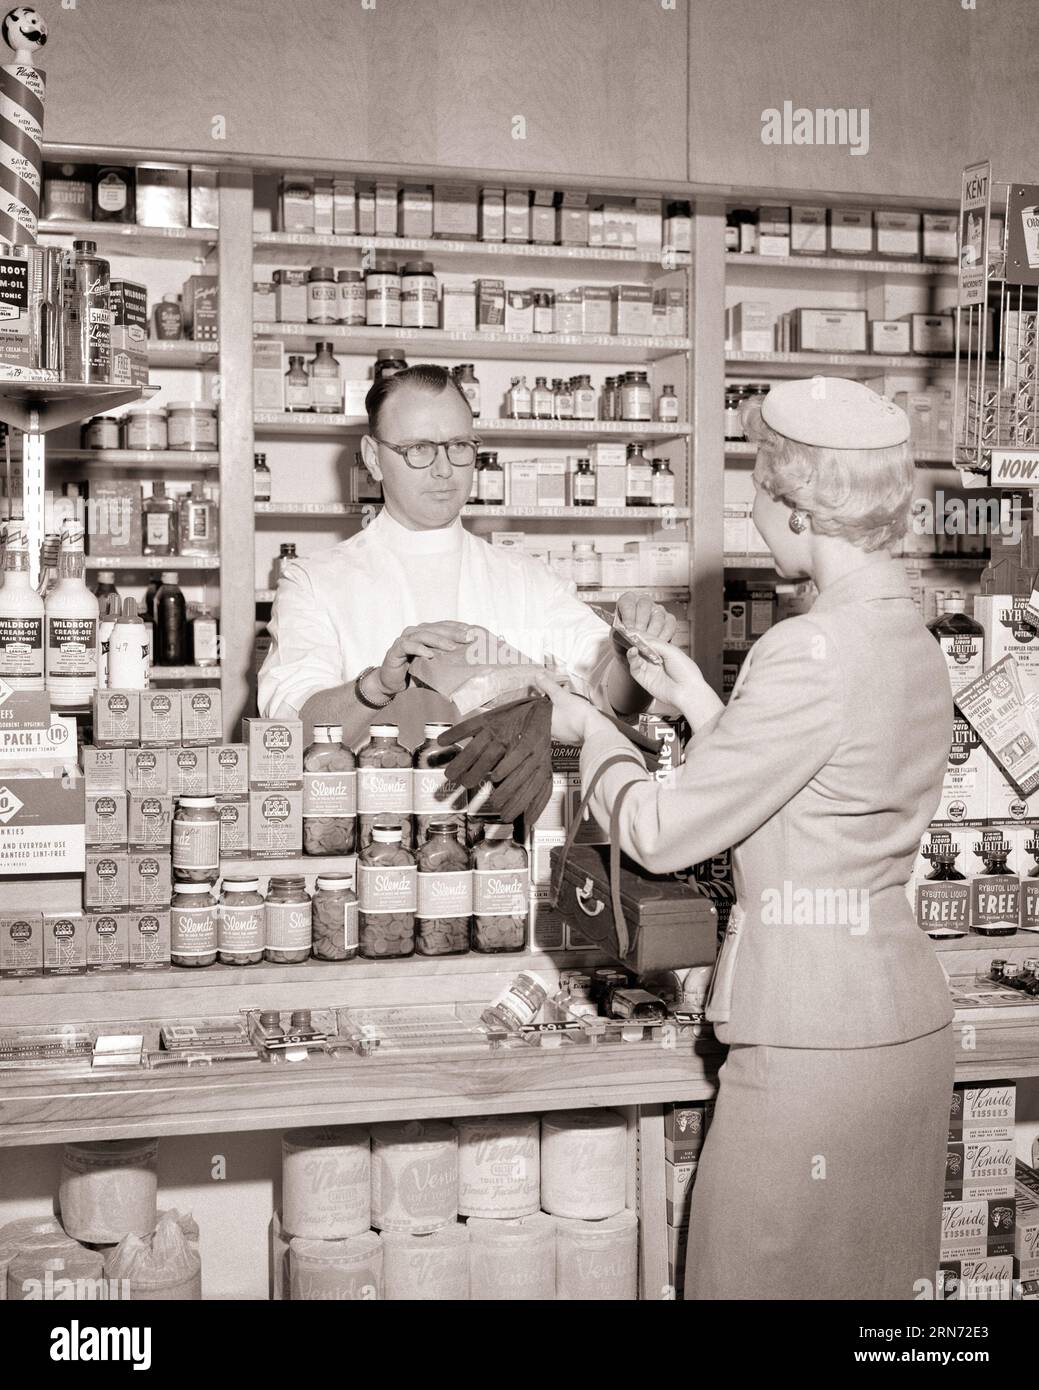 10 Photos of What Shopping Was Like in the 1950s